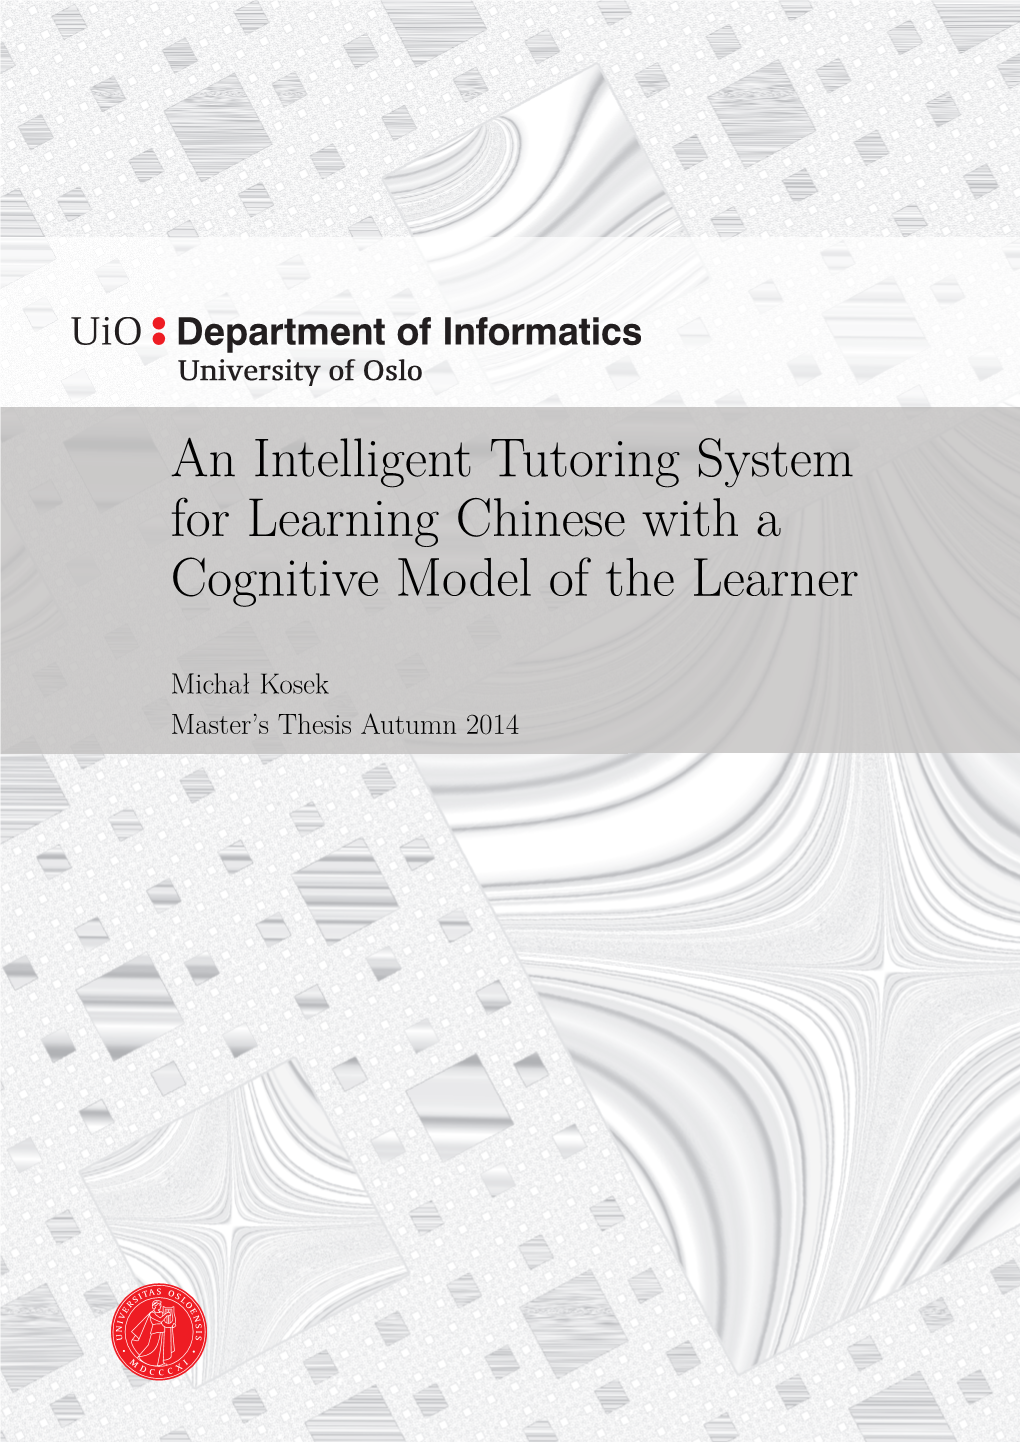 An Intelligent Tutoring System for Learning Chinese with a Cognitive Model of the Learner